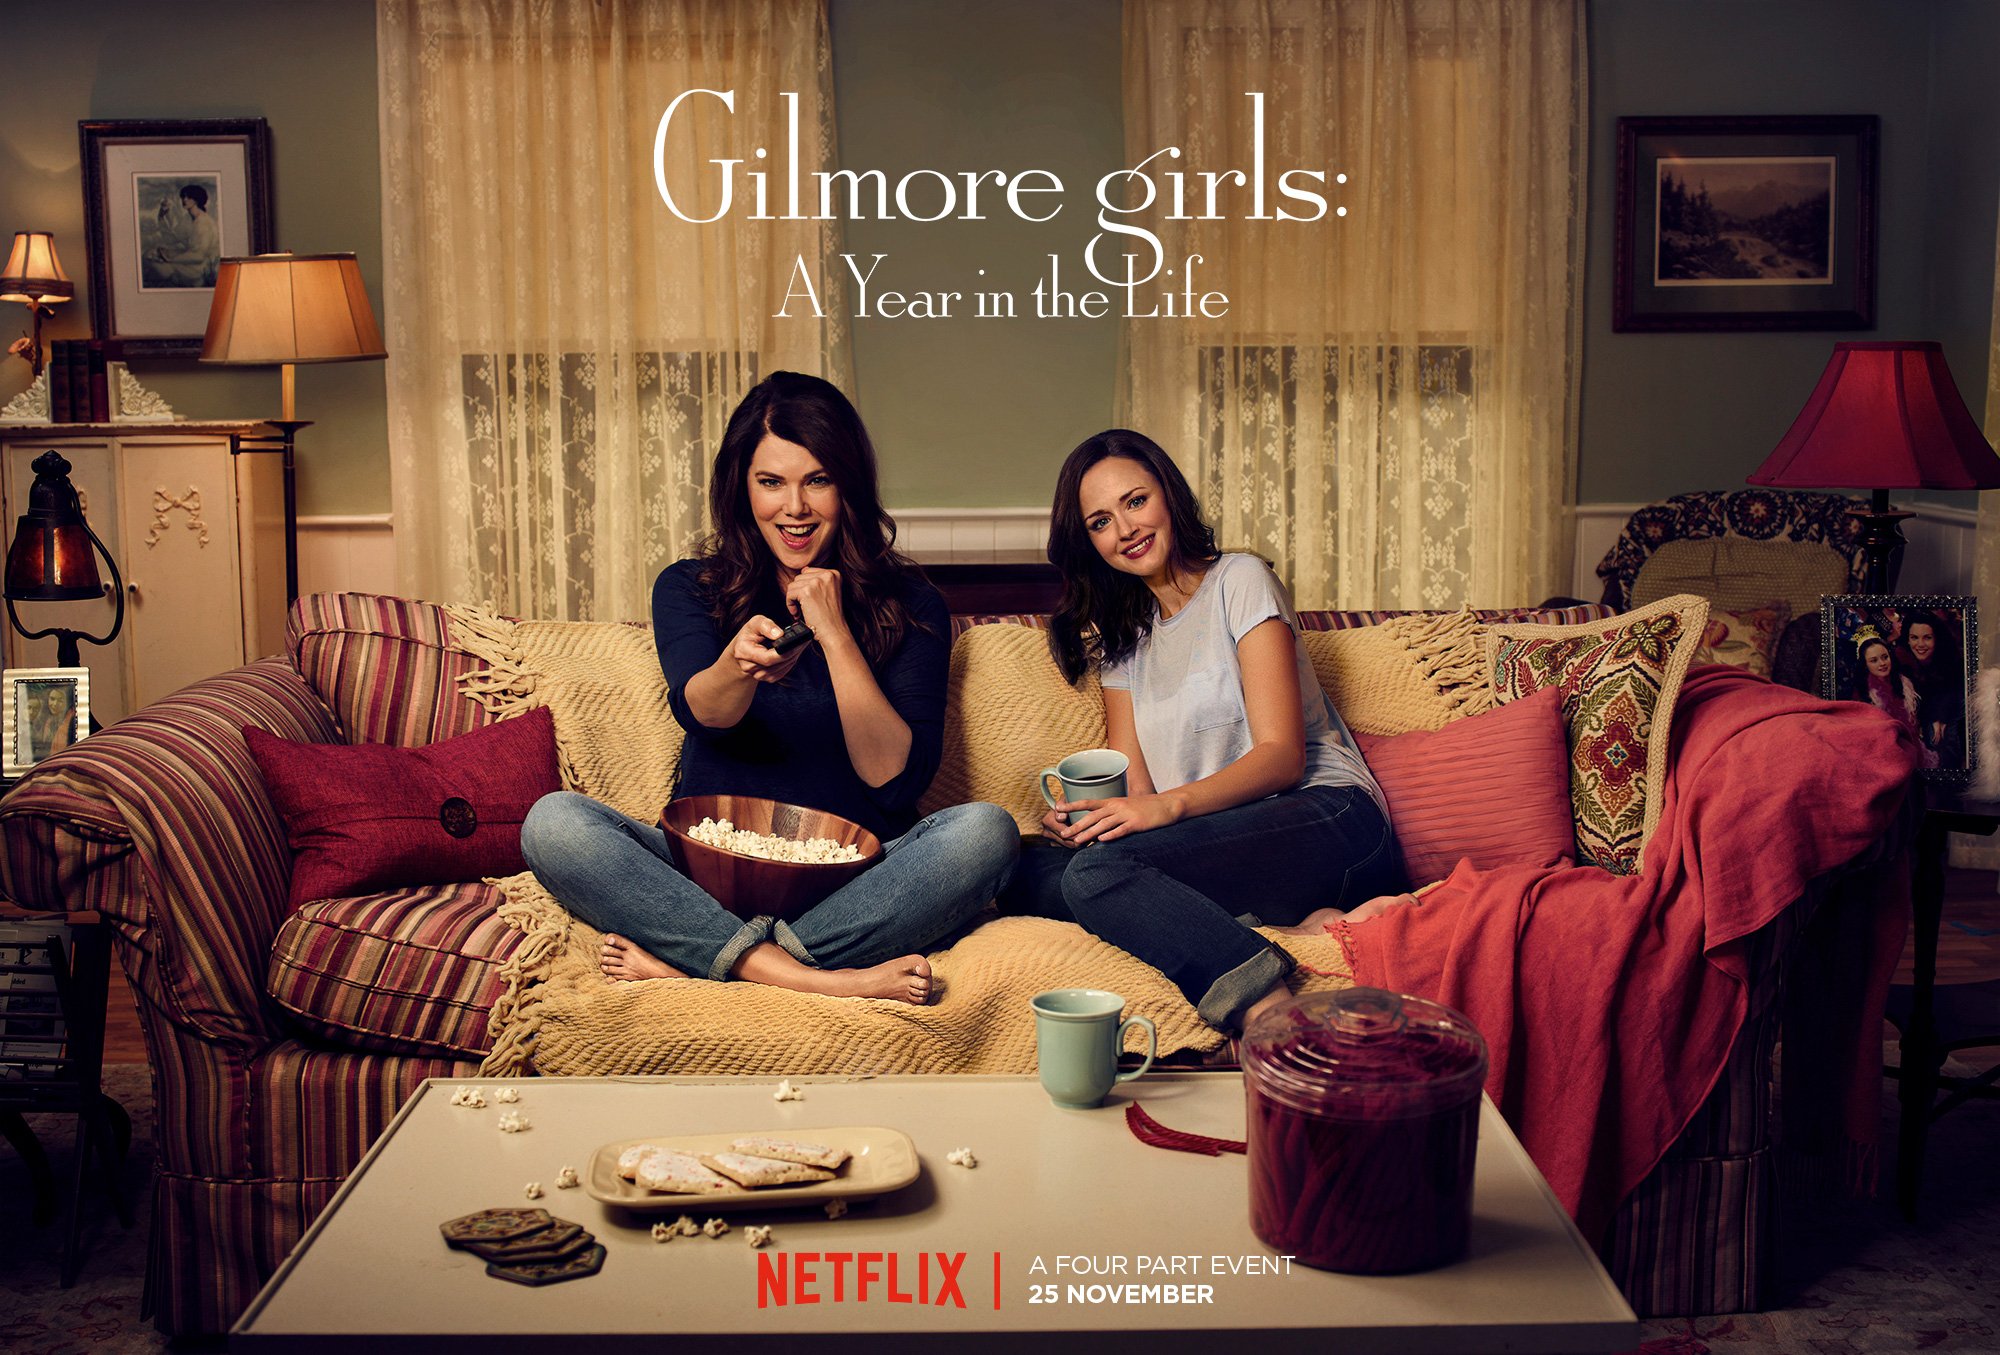 Lauren Graham and Alexis Bledel in a promotional poster for 'Gilmore Girls; A Year in the Life'